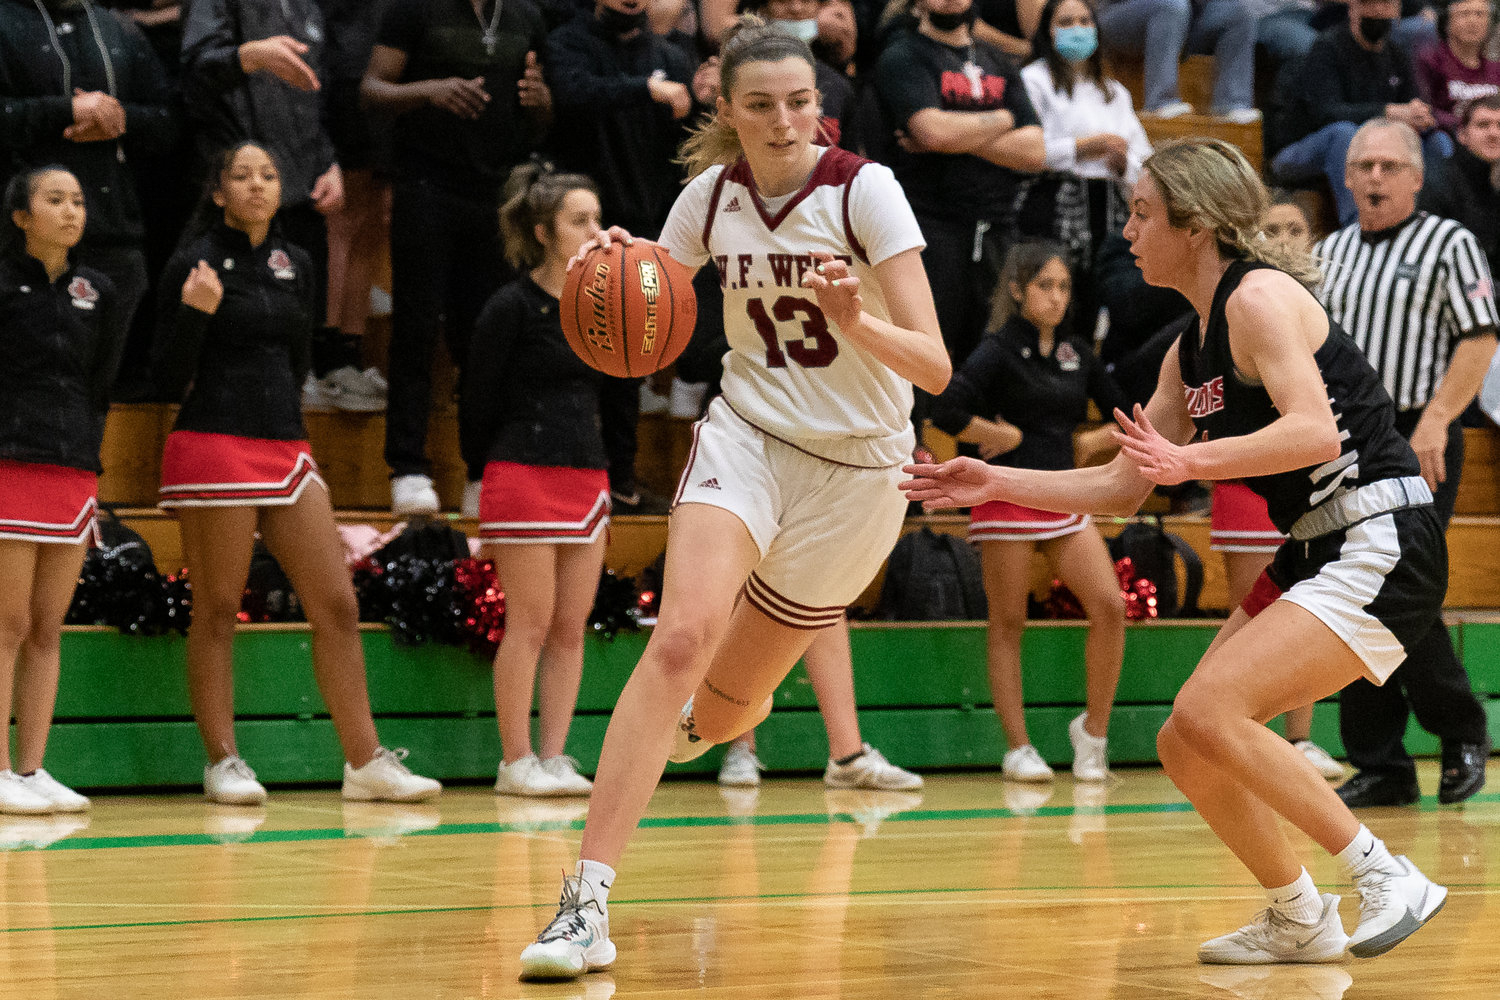 W.F. West forward Drea Brumfield drives baseline against Archbishop Murphy in the regional round of the state tournament at Tumwater Feb. 25.